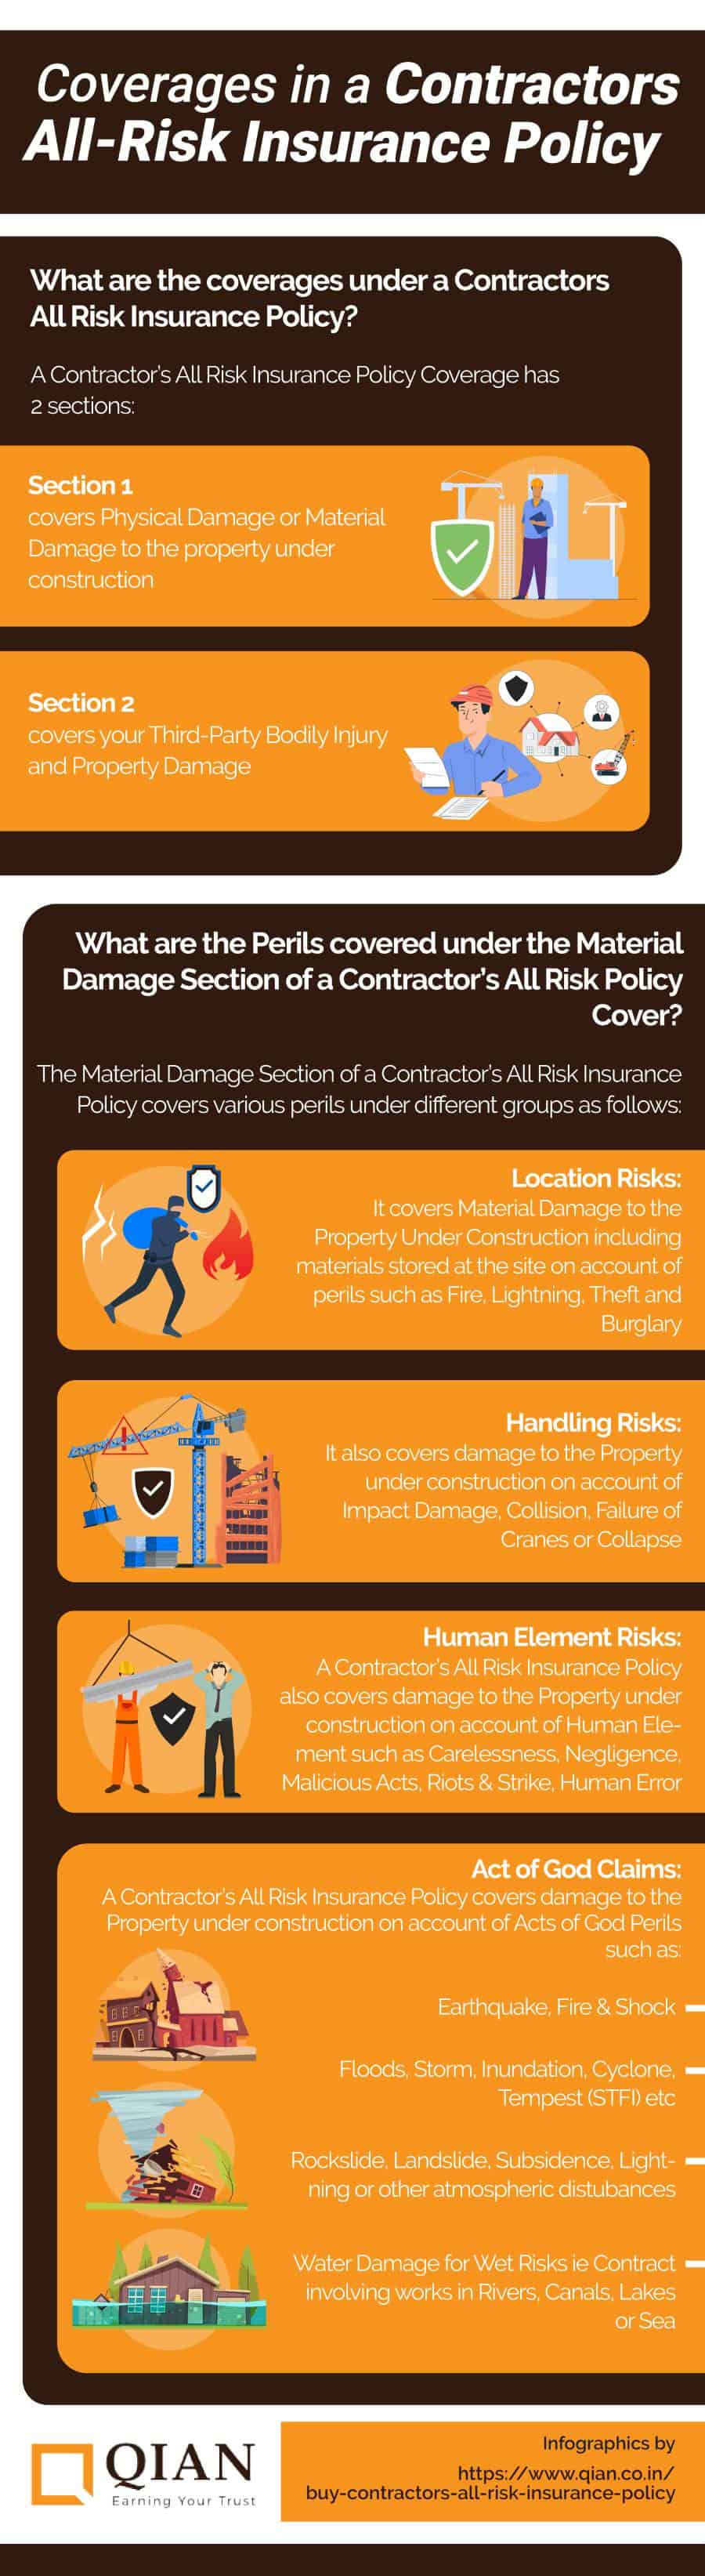 All-Risk Insurance Policy